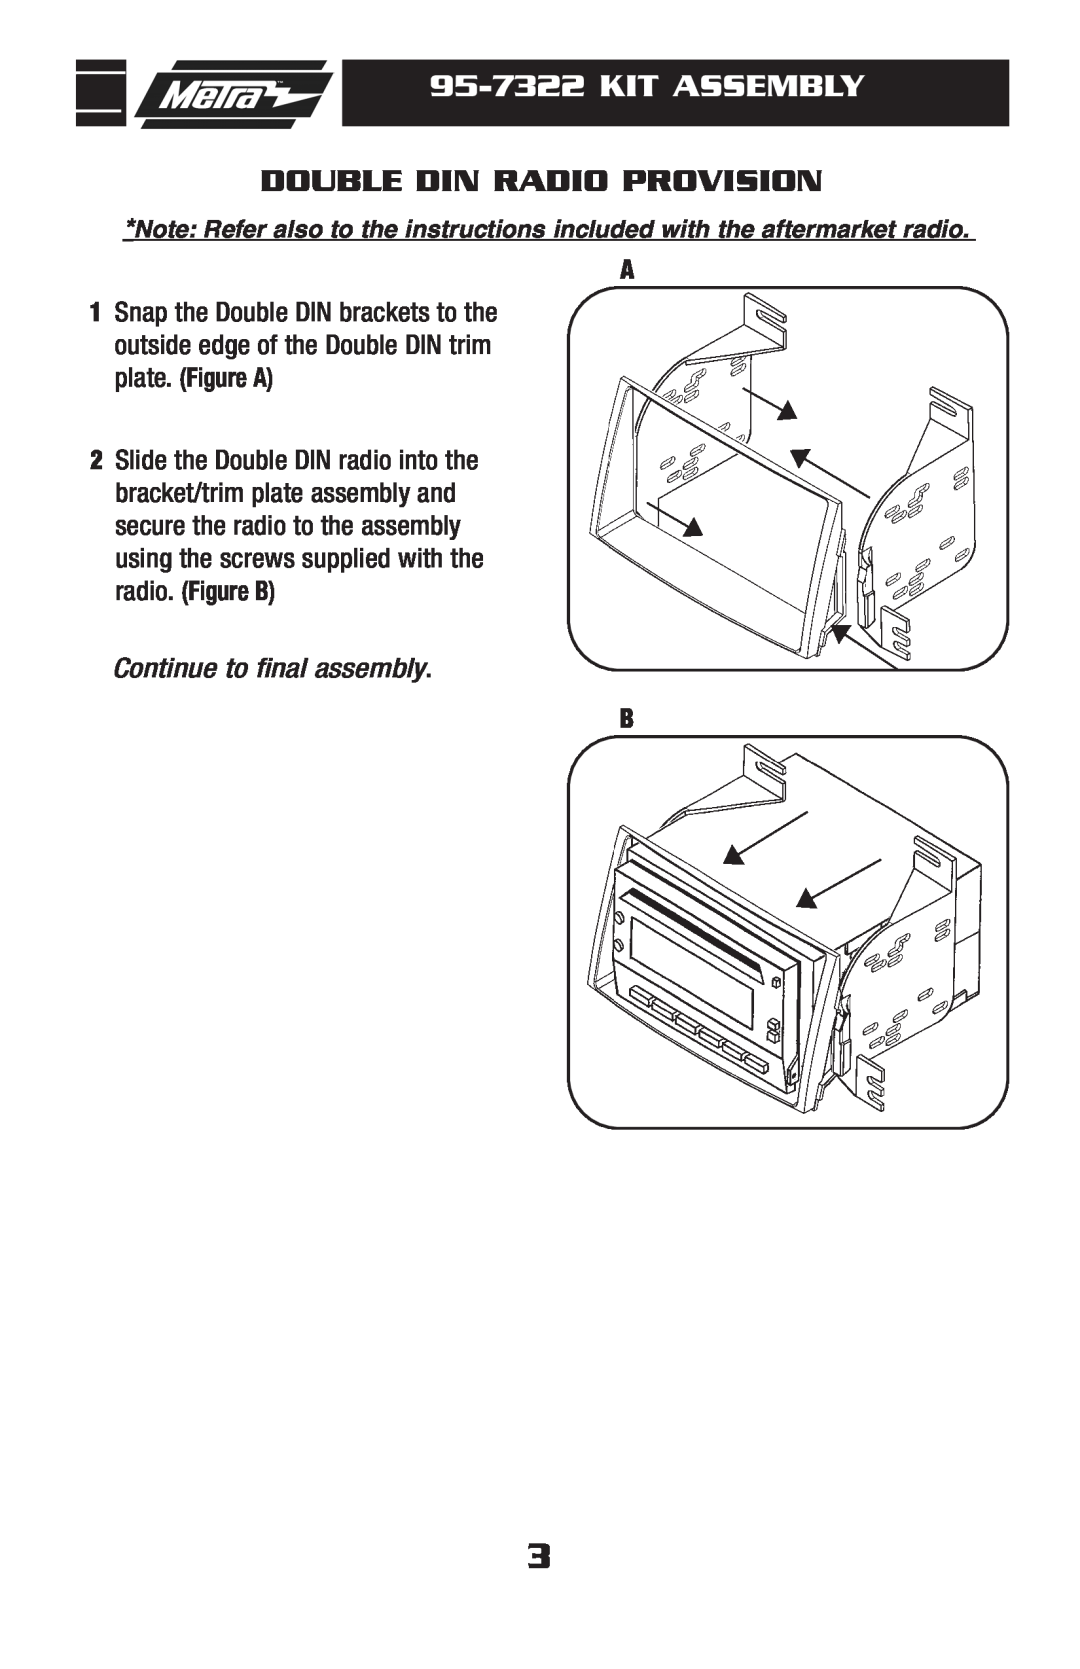 Metra Electronics installation instructions 95-7322KIT ASSEMBLY, Double Din Radio Provision, Continue to final assembly 